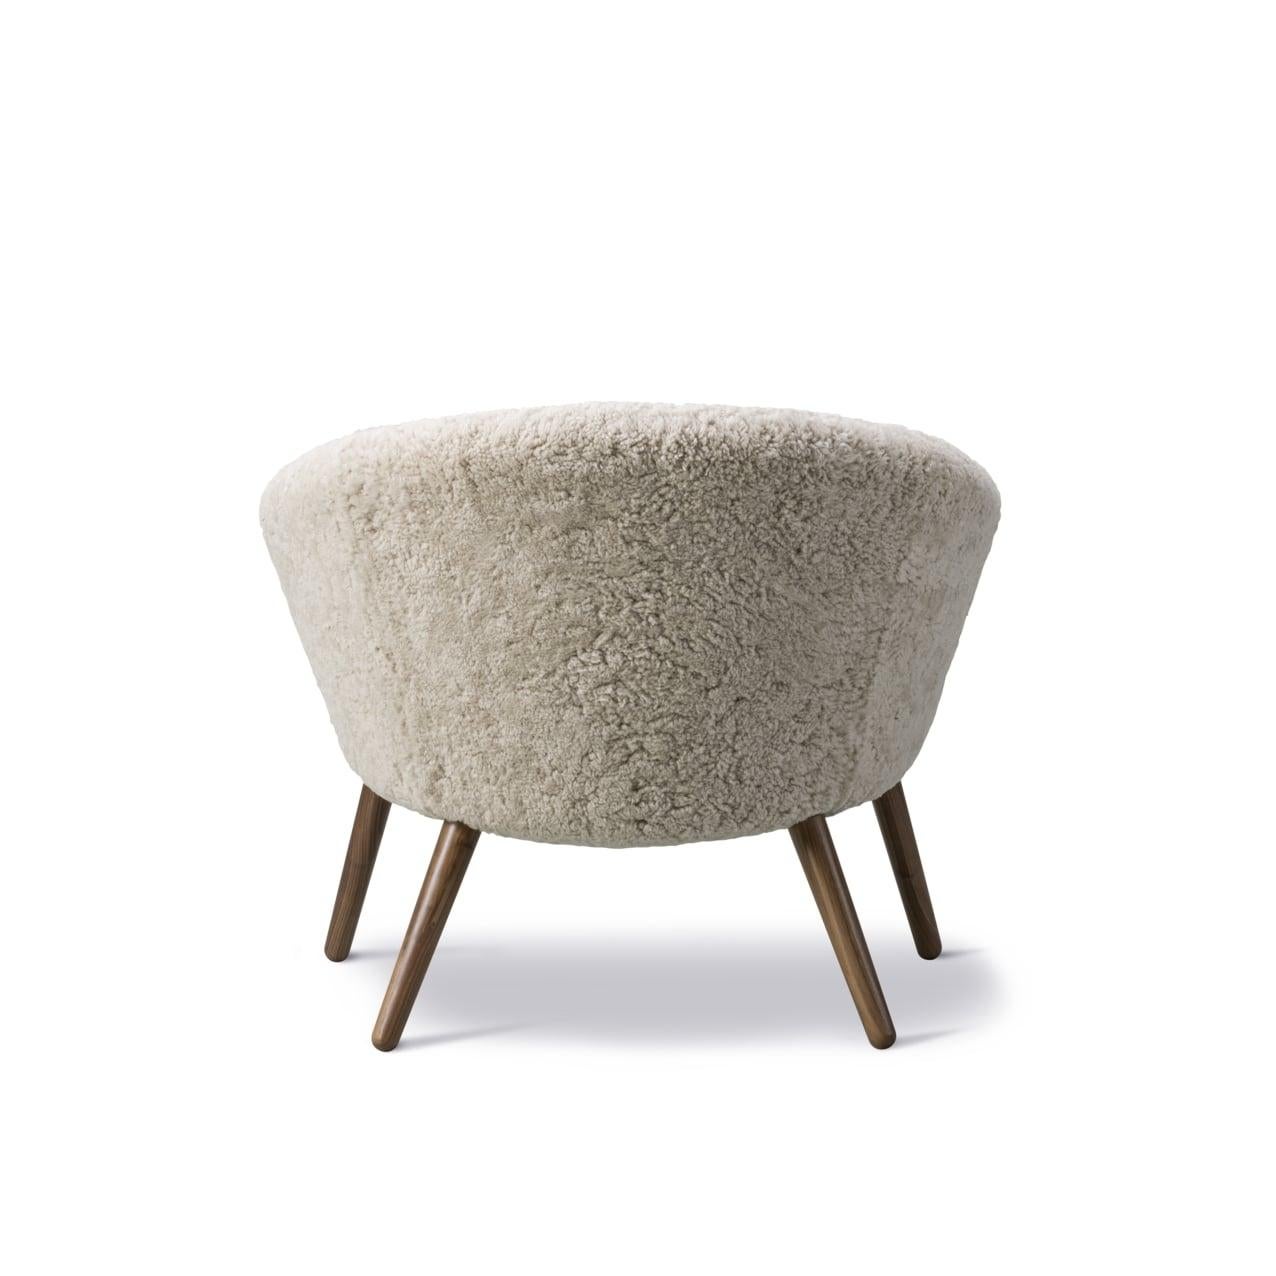 Contemporary Ditzel Lounge Chair in Moonlight Sheepskin / Lacquered Walnut for Fredericia For Sale